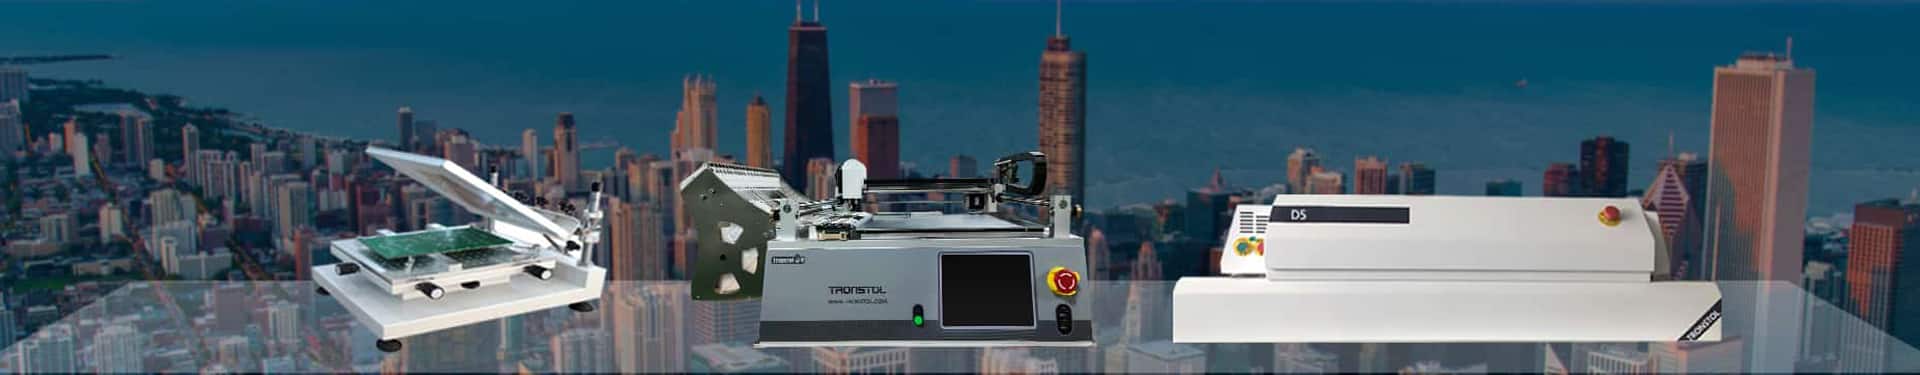 Tronstol 3V (Advanced) pick and place machine Line 5